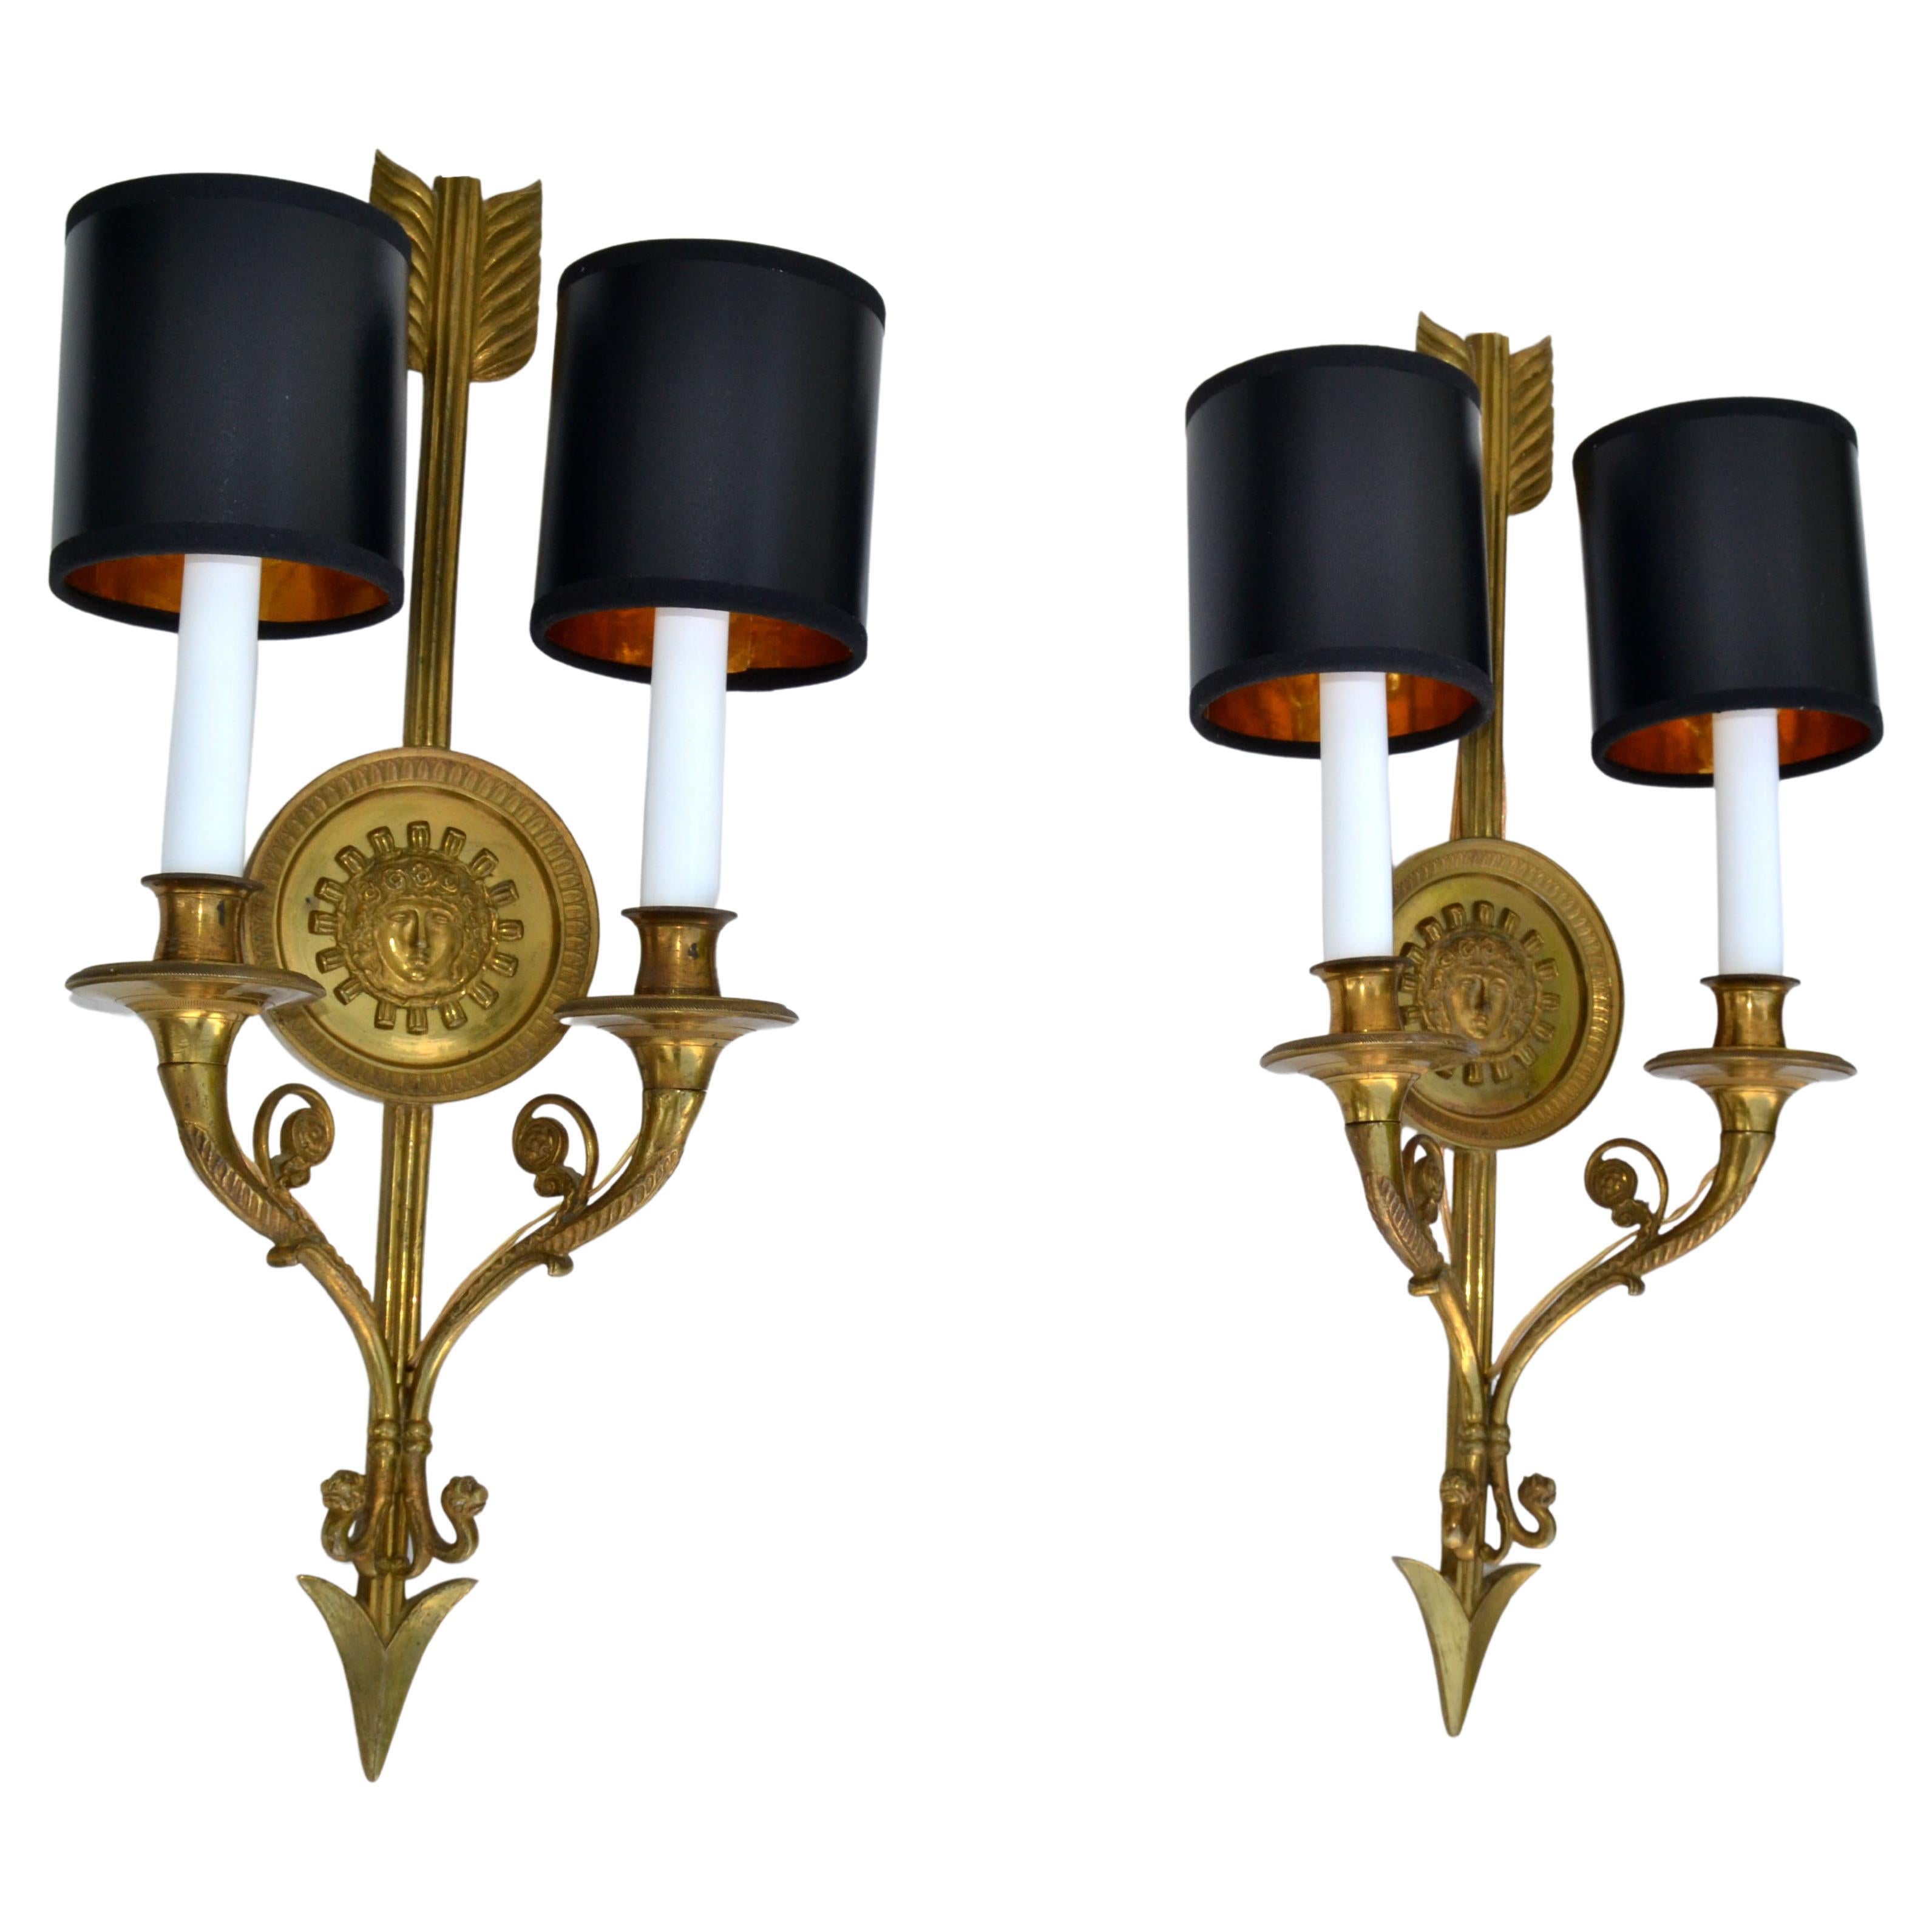 Pair of Andre Arbus Bronze Arrow Sconces 2 Lights, Wall Lamp French Neoclassical For Sale